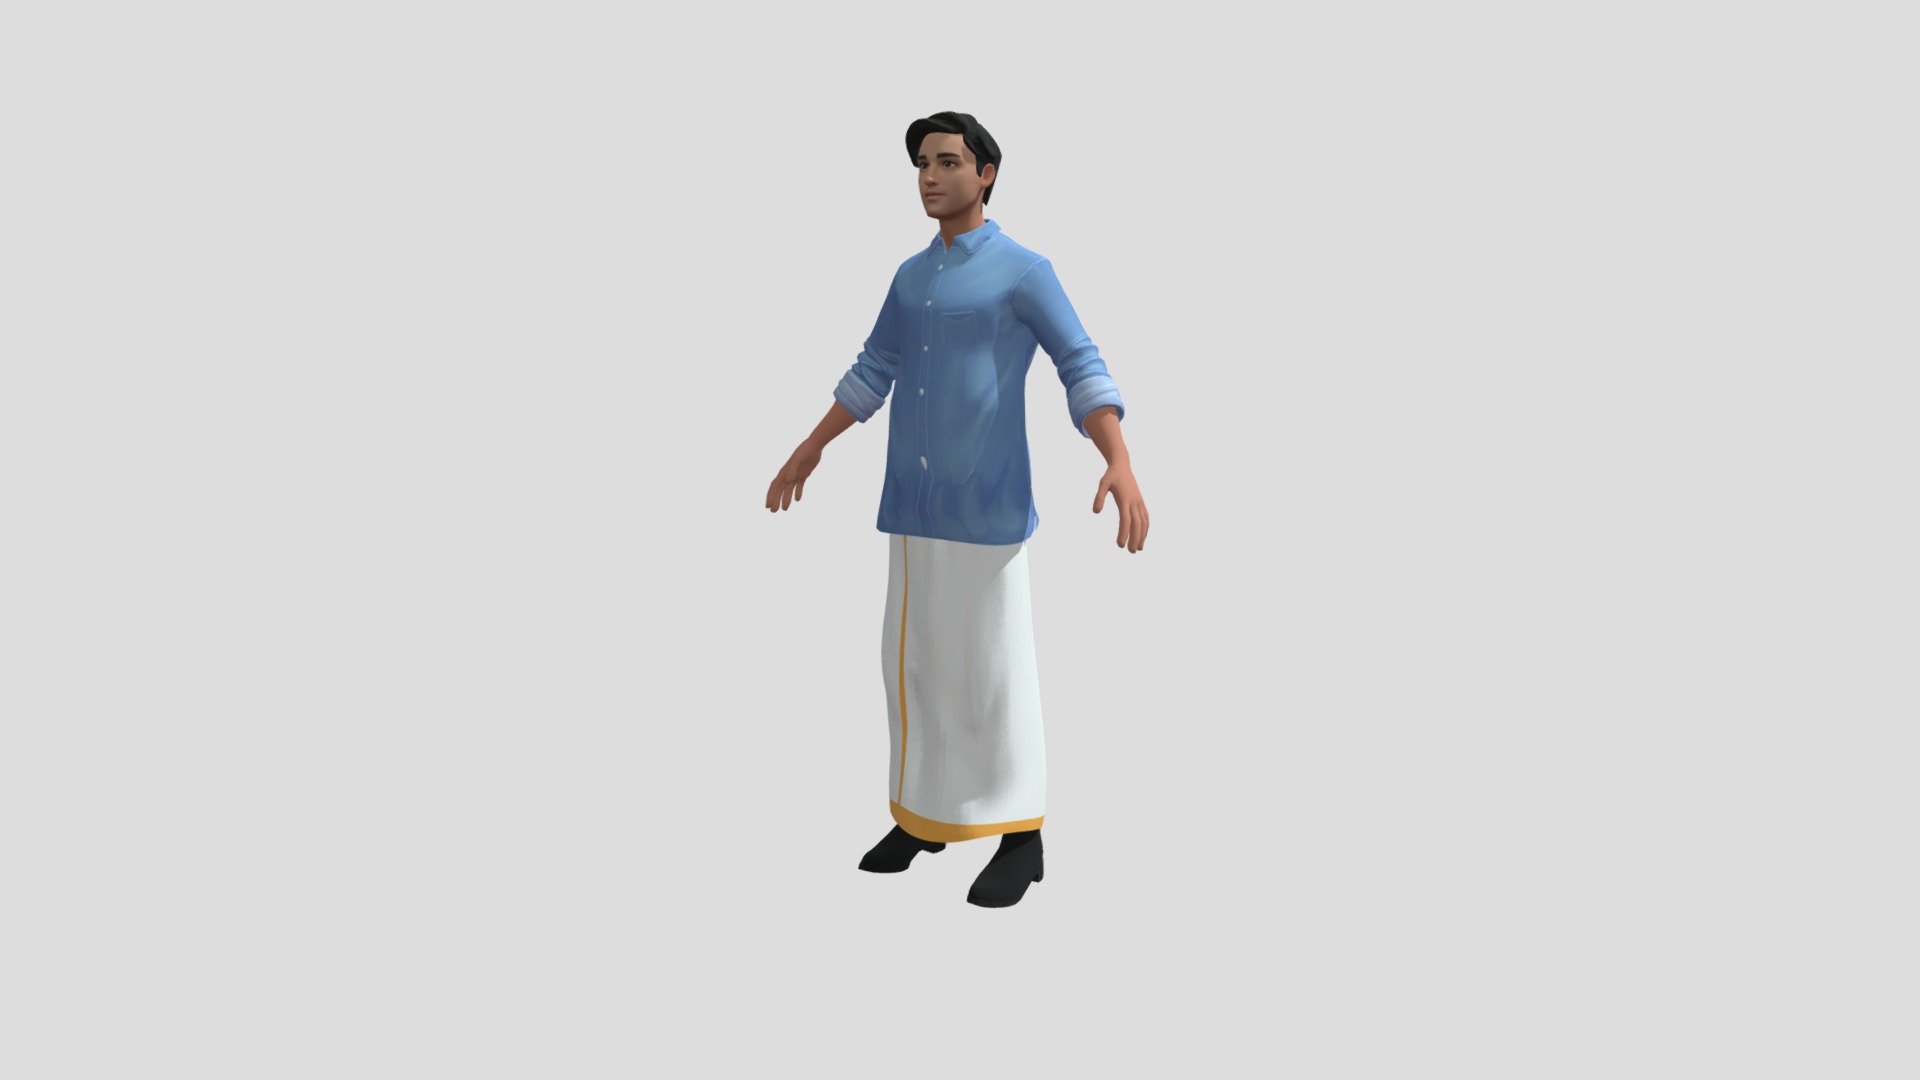 Rigged model of indian characters rigged model created in compatible for game .
Rigged model of indian characters rigged model created in compatible for game 3d model